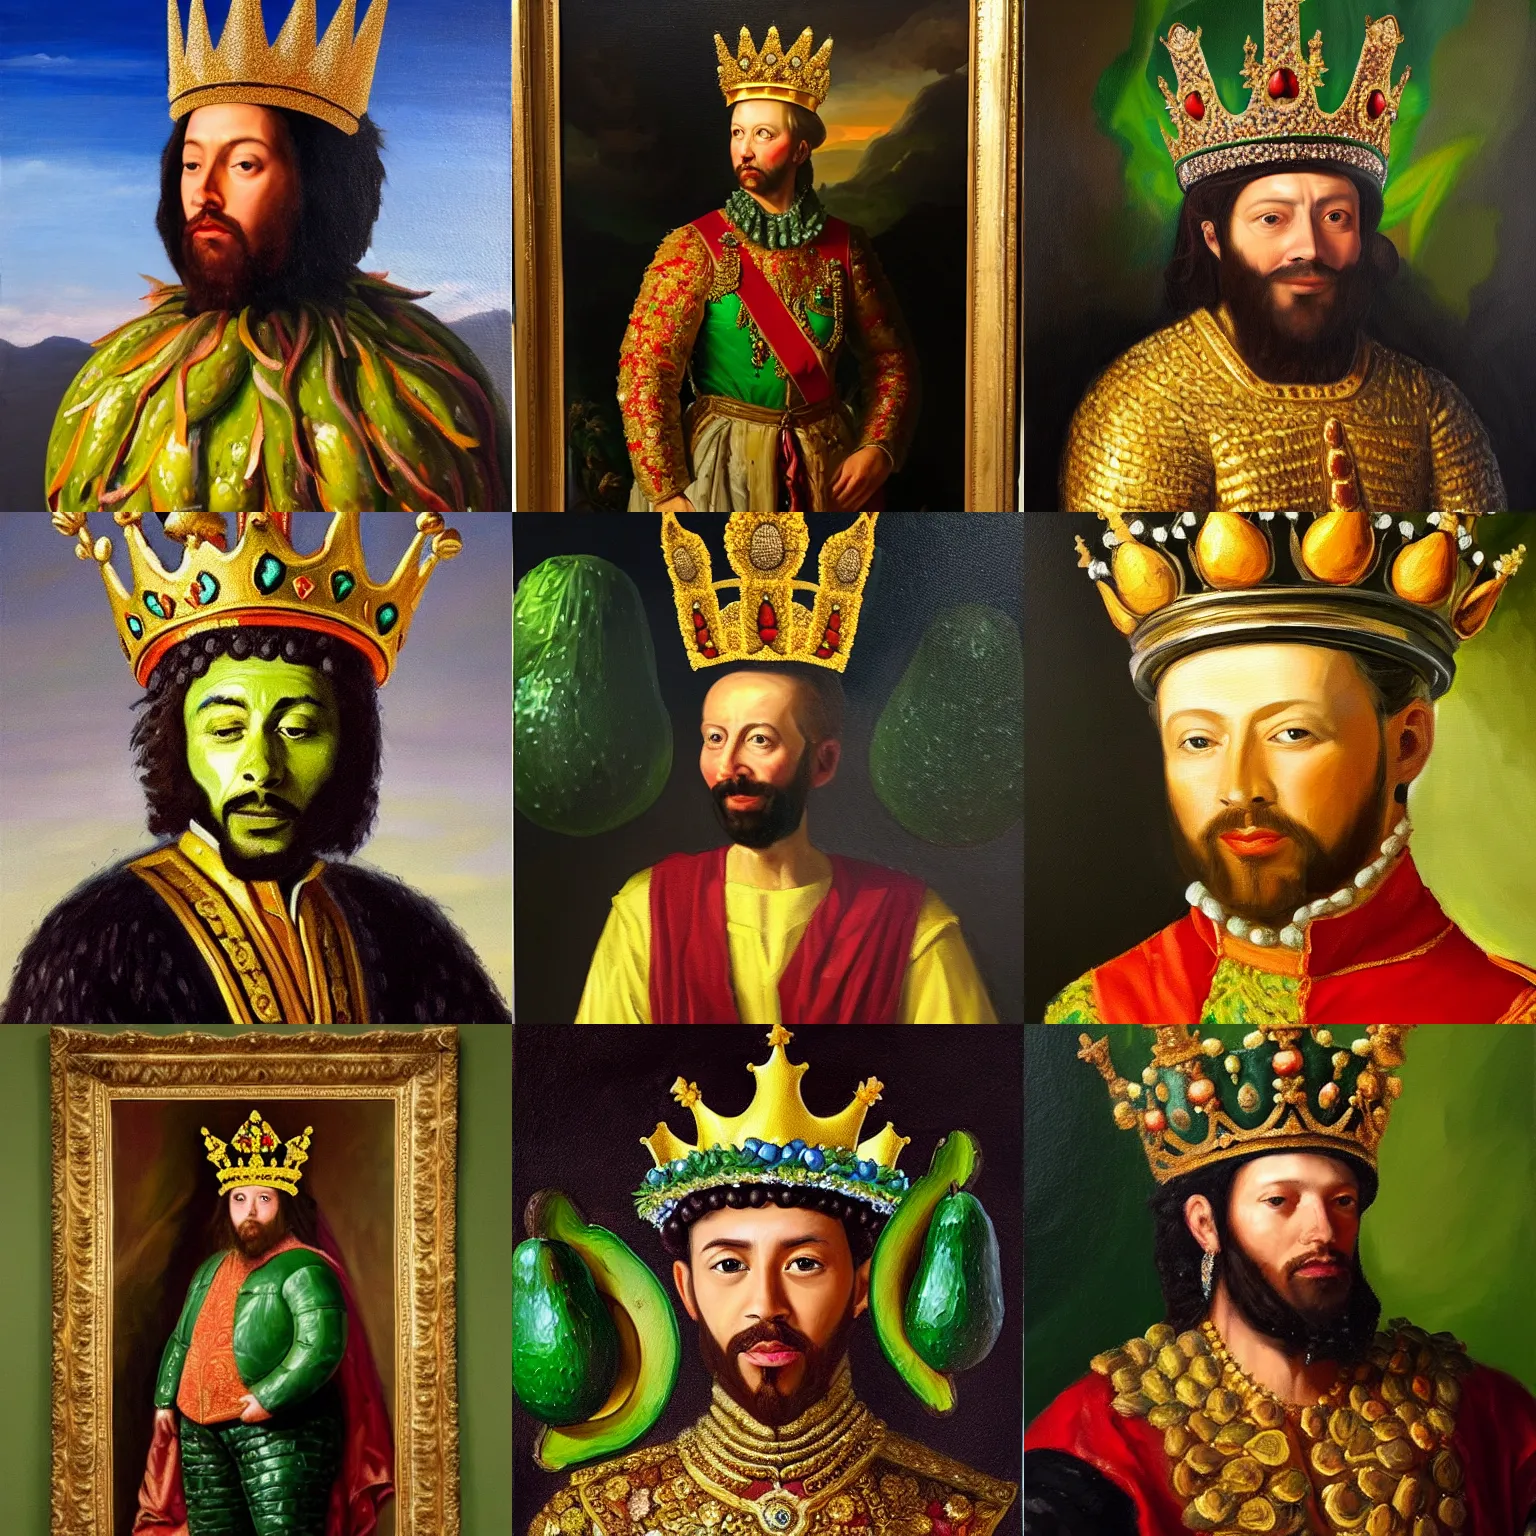 Prompt: An oil painting of a king wearing a crown made of avocados and a royal mantle. Fantastical, vivid.